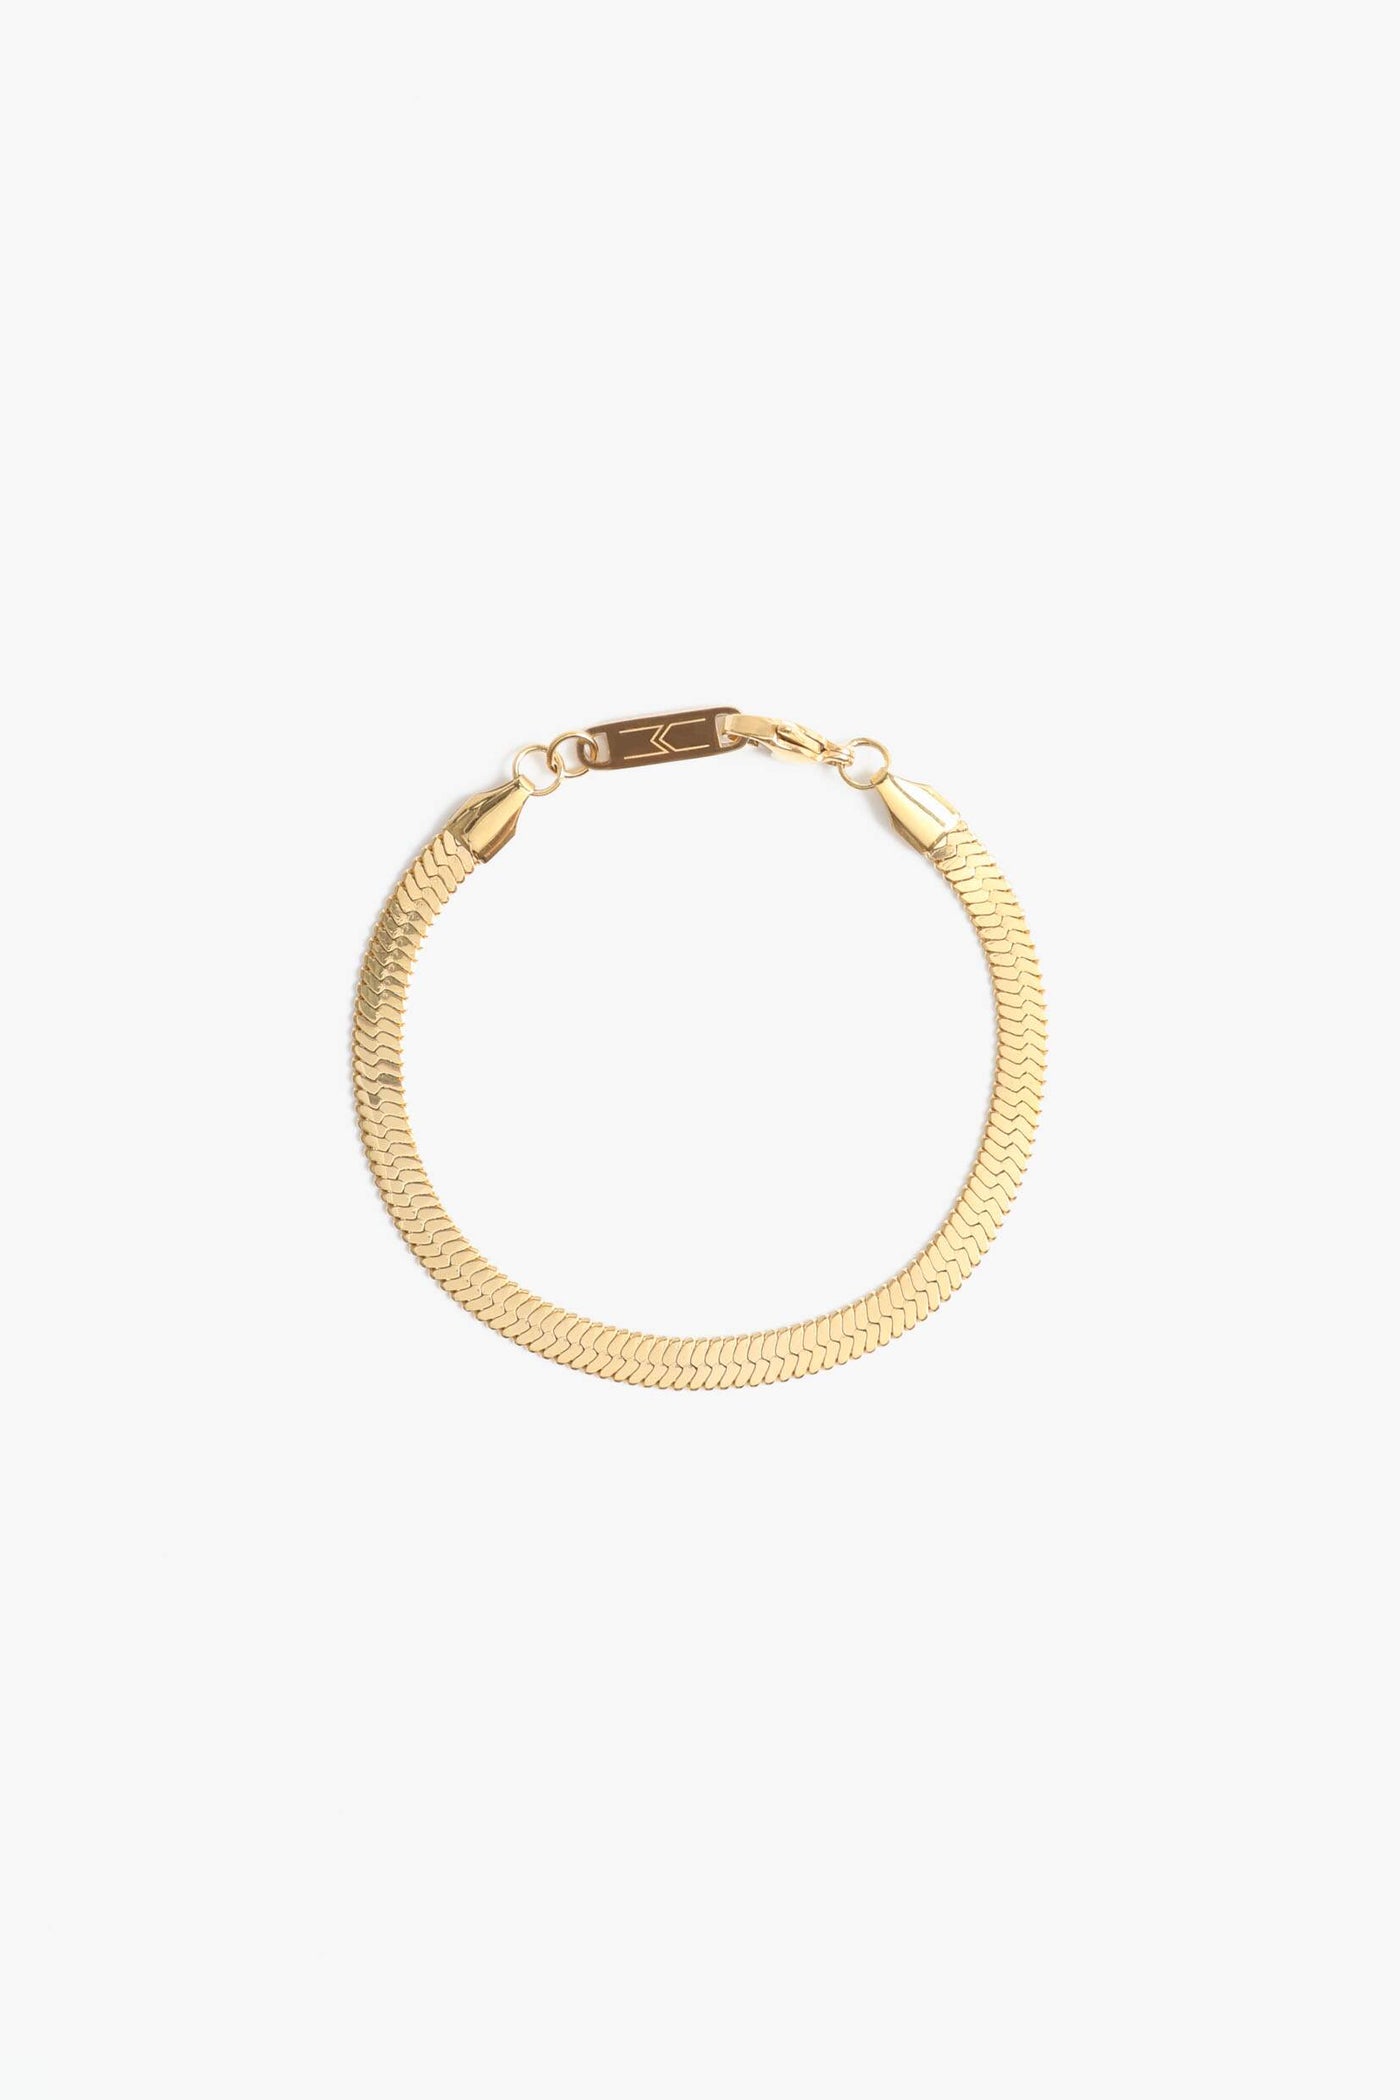 Marrin Costello Jewelry 5mm thick herringbone snake chain bracelet with lobster clasp closure. Waterproof, sustainable, hypoallergenic. 14k gold plated stainless steel.